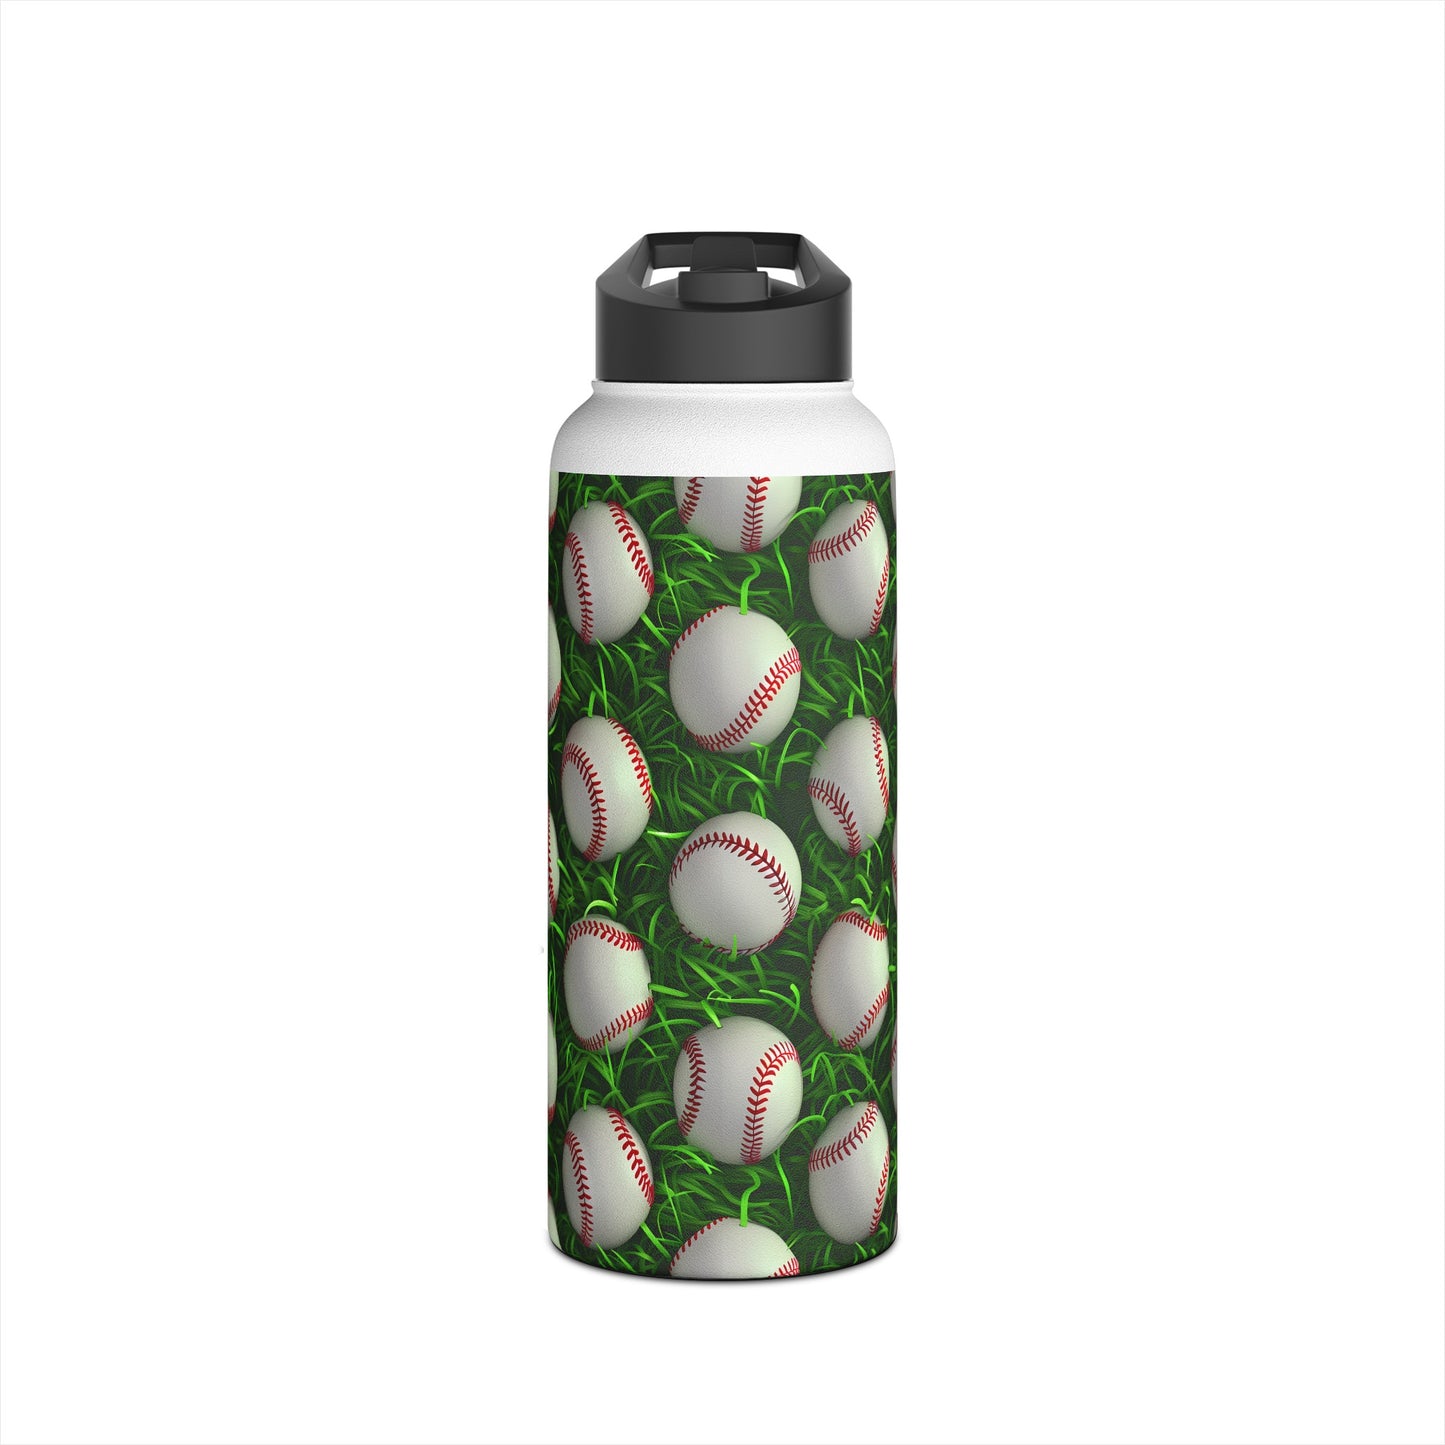 Stainless Steel Water Bottle Thermos, 32oz, 3D Baseball - Double Wall Insulation Keeps Drinks Hot or Cold